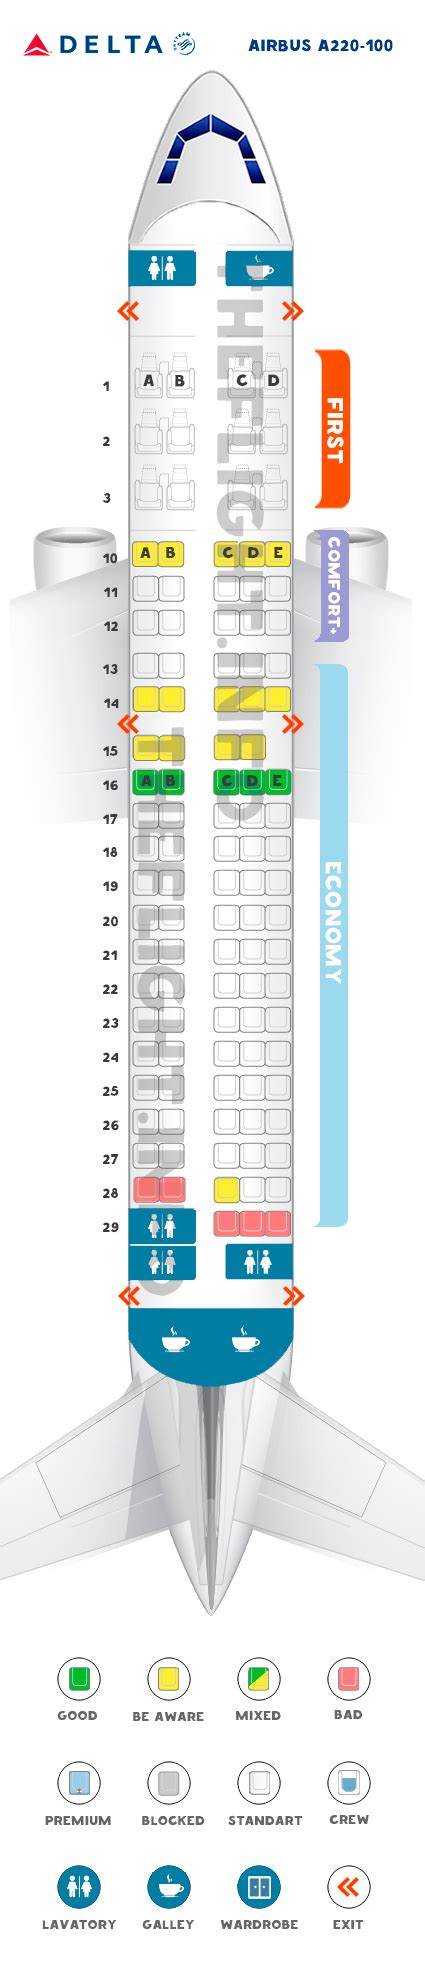 A 220 Airplane Seat Map Image To U